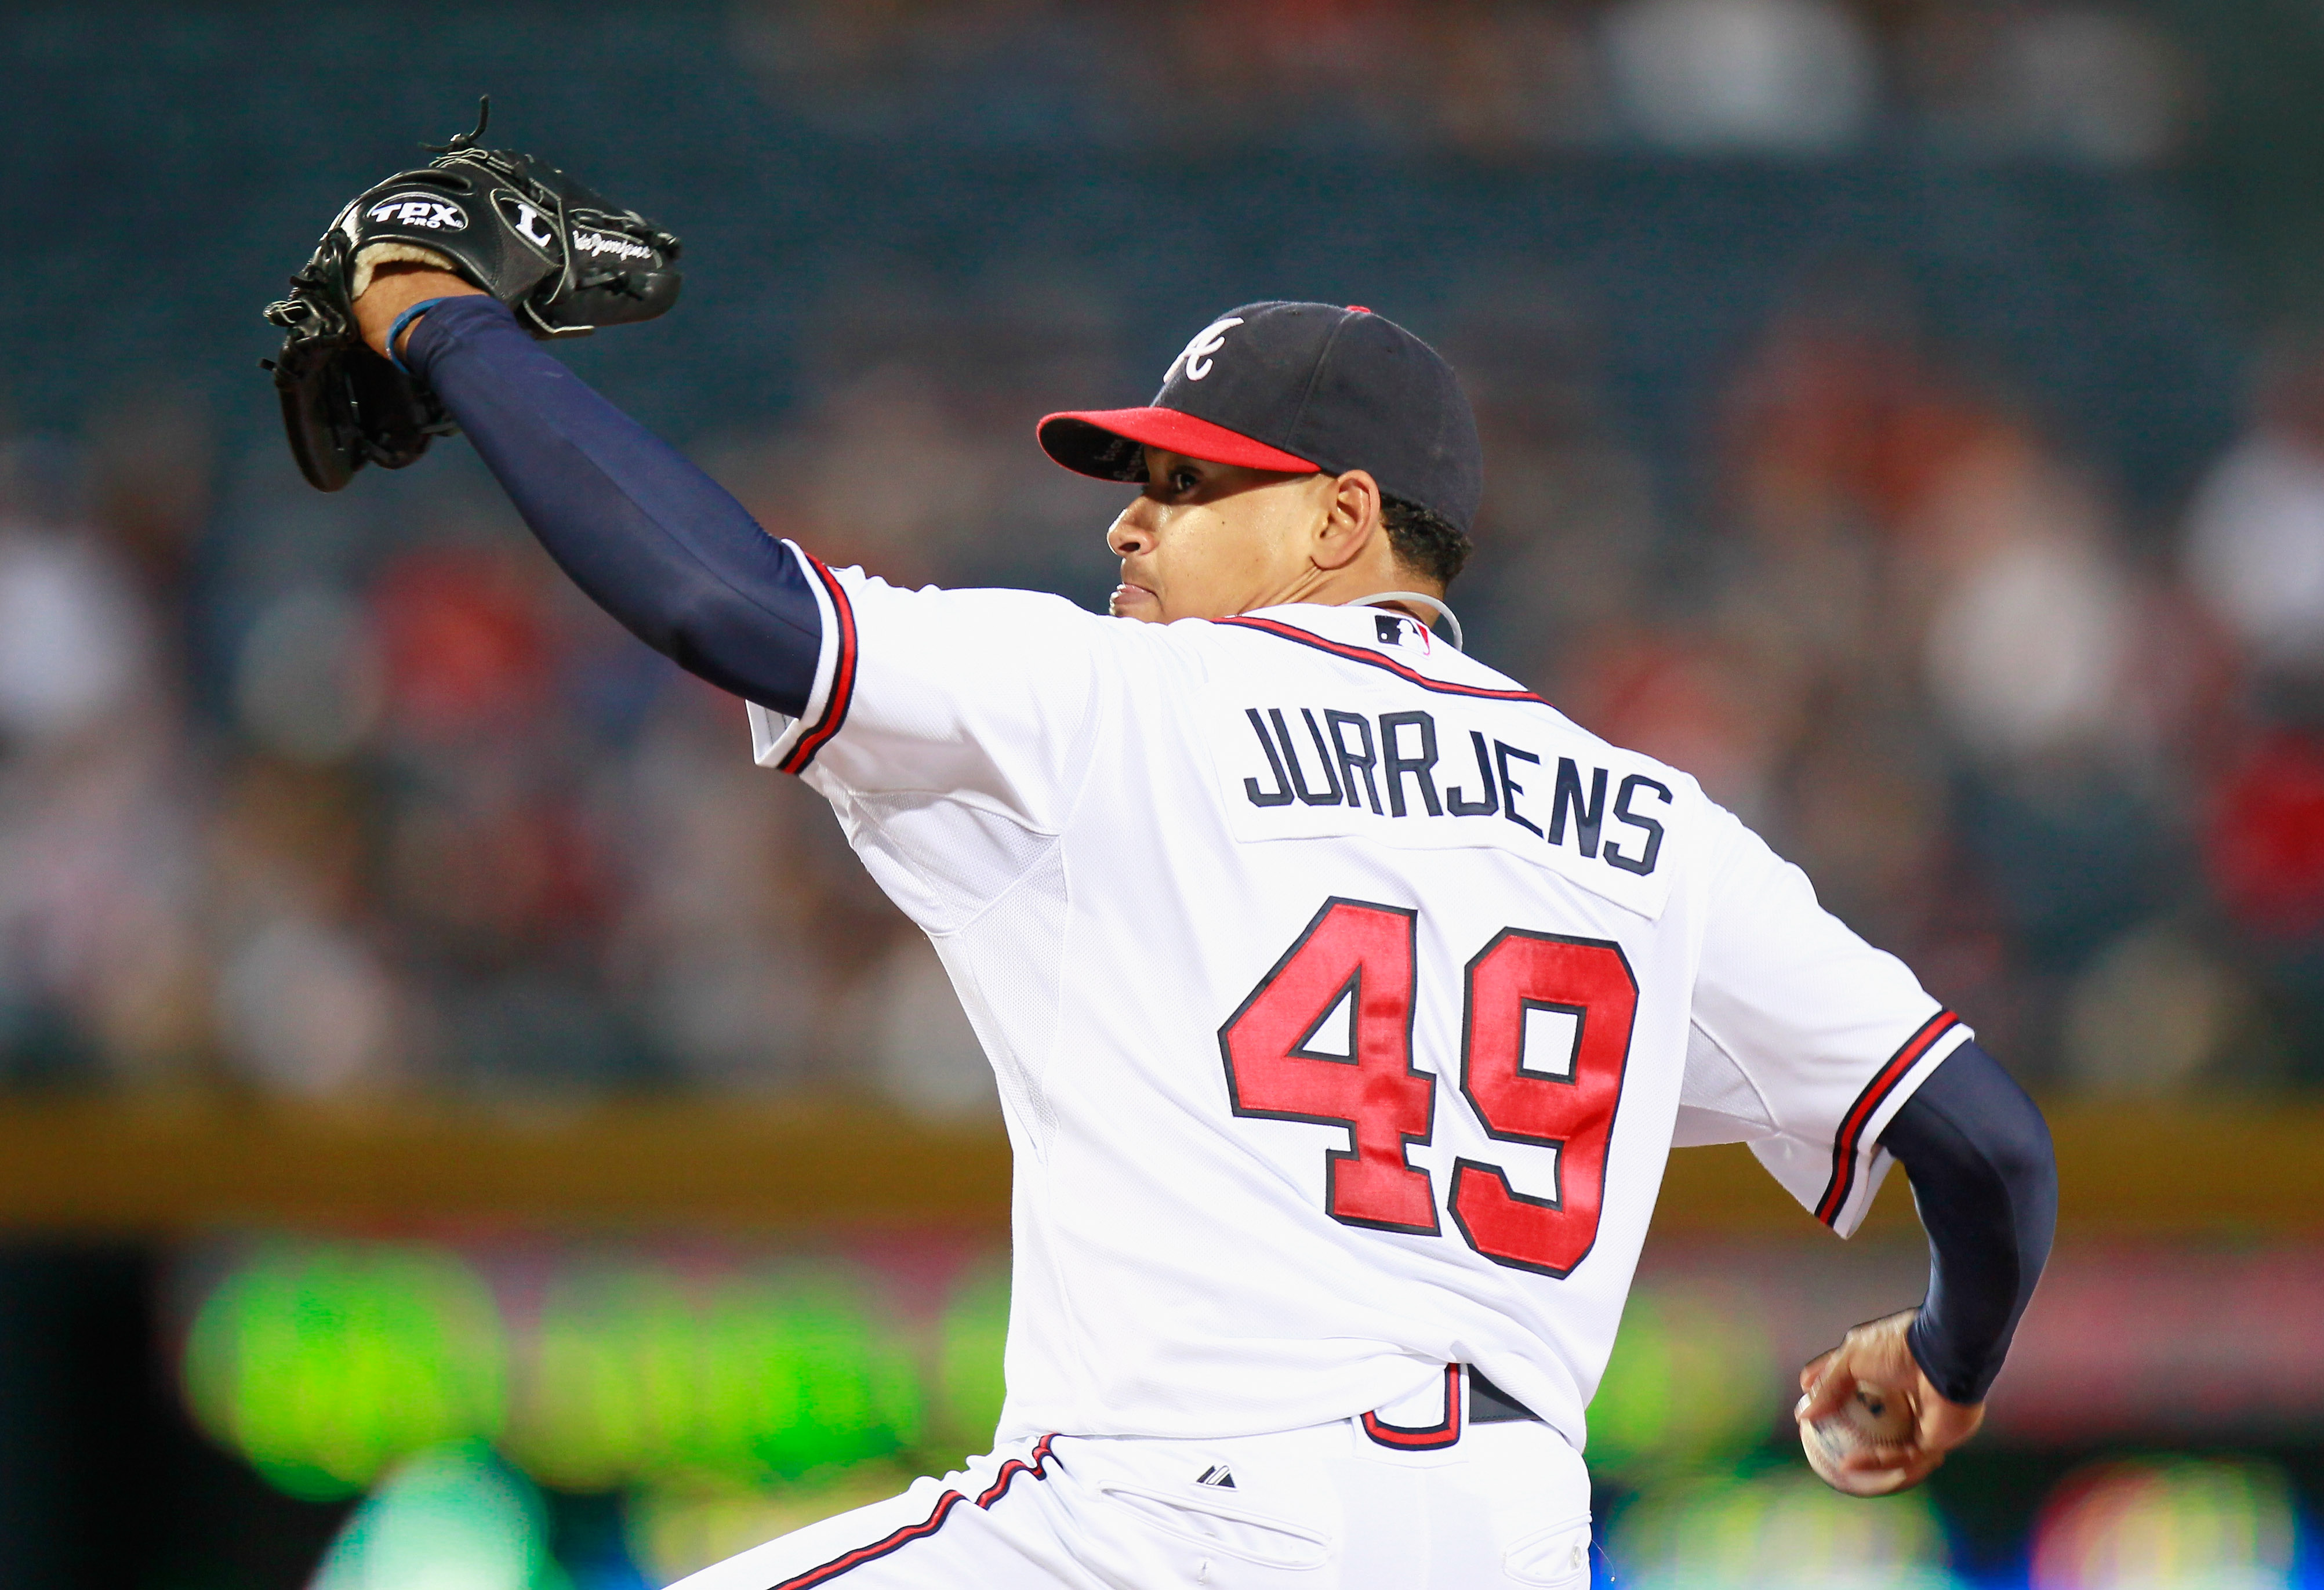 Jair Jurrjens will need to have a great season for the Braves to have success